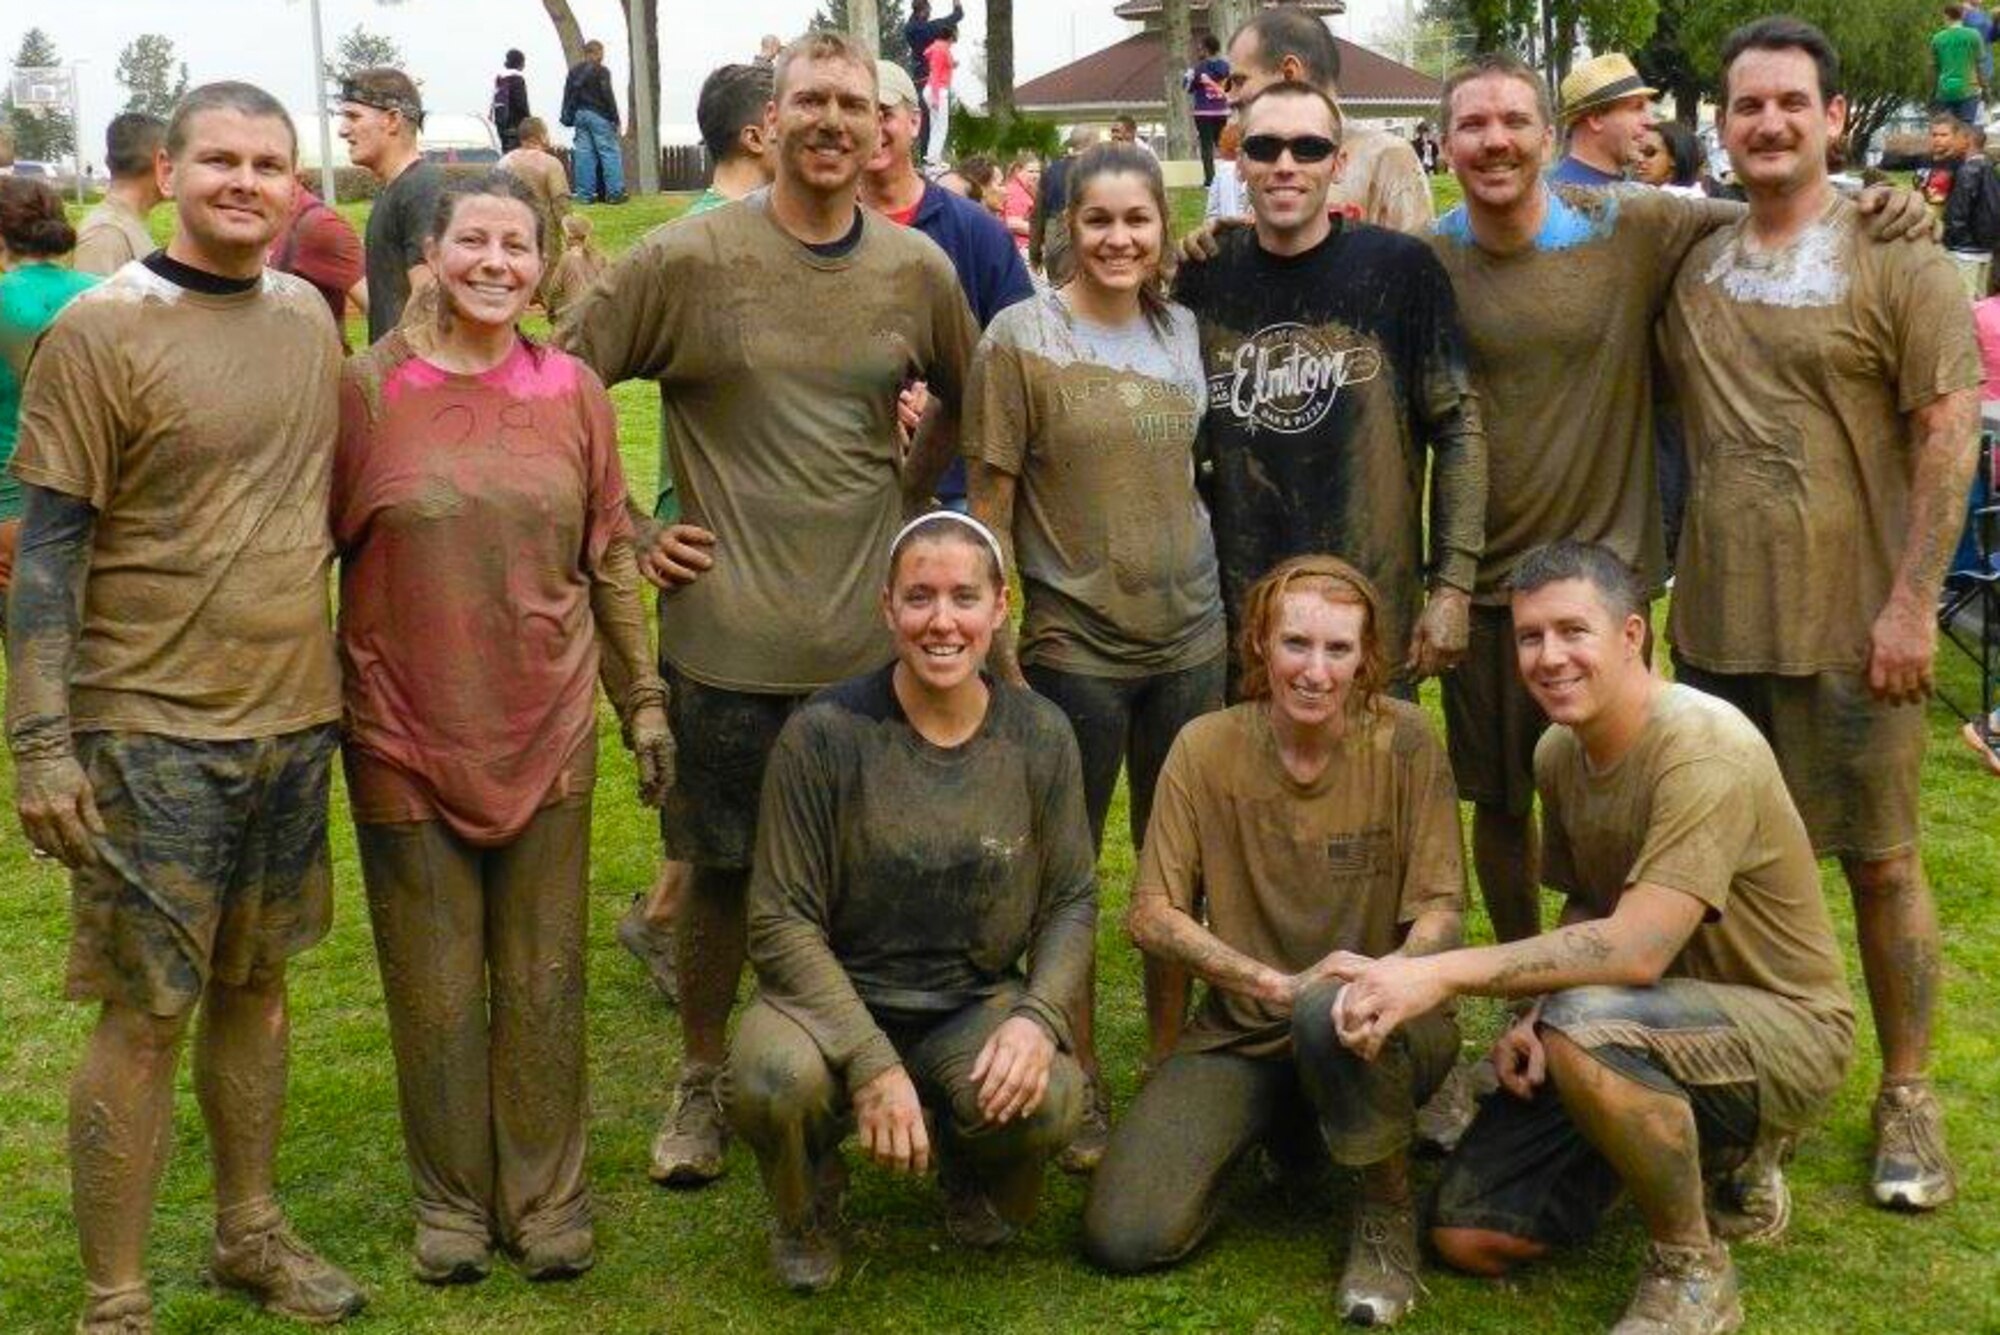 Master Sgt. Chris Rekrut (bottom right), 728th Air Mobility Squadron Quality Assurance superintendent, poses with his wife, Corrine, and other members of the 728th AMS after the Dirty Dash run May 18, 2013, Incirlik Air Base, Turkey. Rekrut was recently promoted by means of the Stripes for Exceptional Performers program for his sustained exceptional performance at work and his involvement in the community. (Courtesy photo)